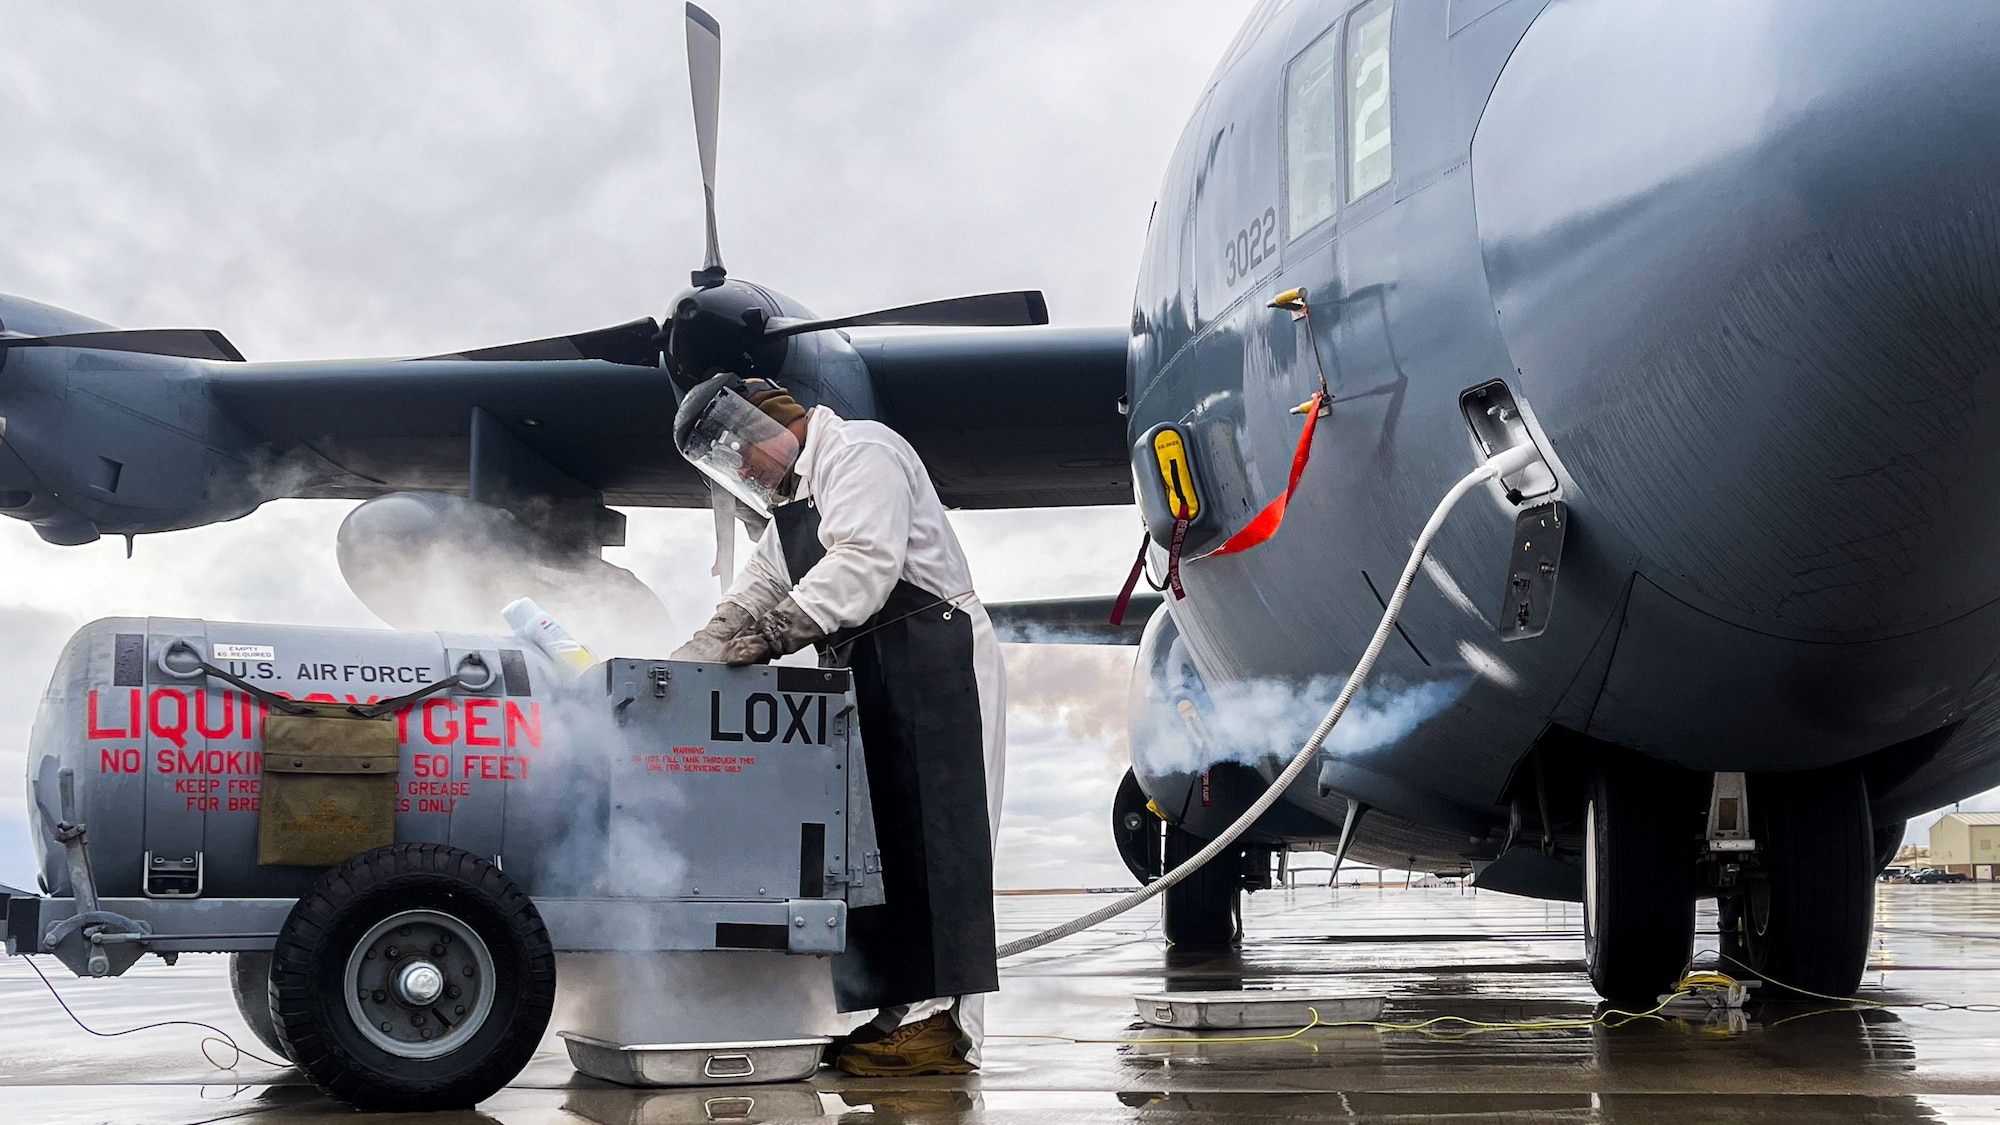 Senior Airman Anthony Ganni, an aerospace maintenance journeyman assigned to the 910th Aircraft Maintenance Squadron, services liquid oxygen on a 910th Airlift Wing C-130H Hercules aircraft on Jan. 11, 2023, at Mountain Home Air Force Base, Idaho.